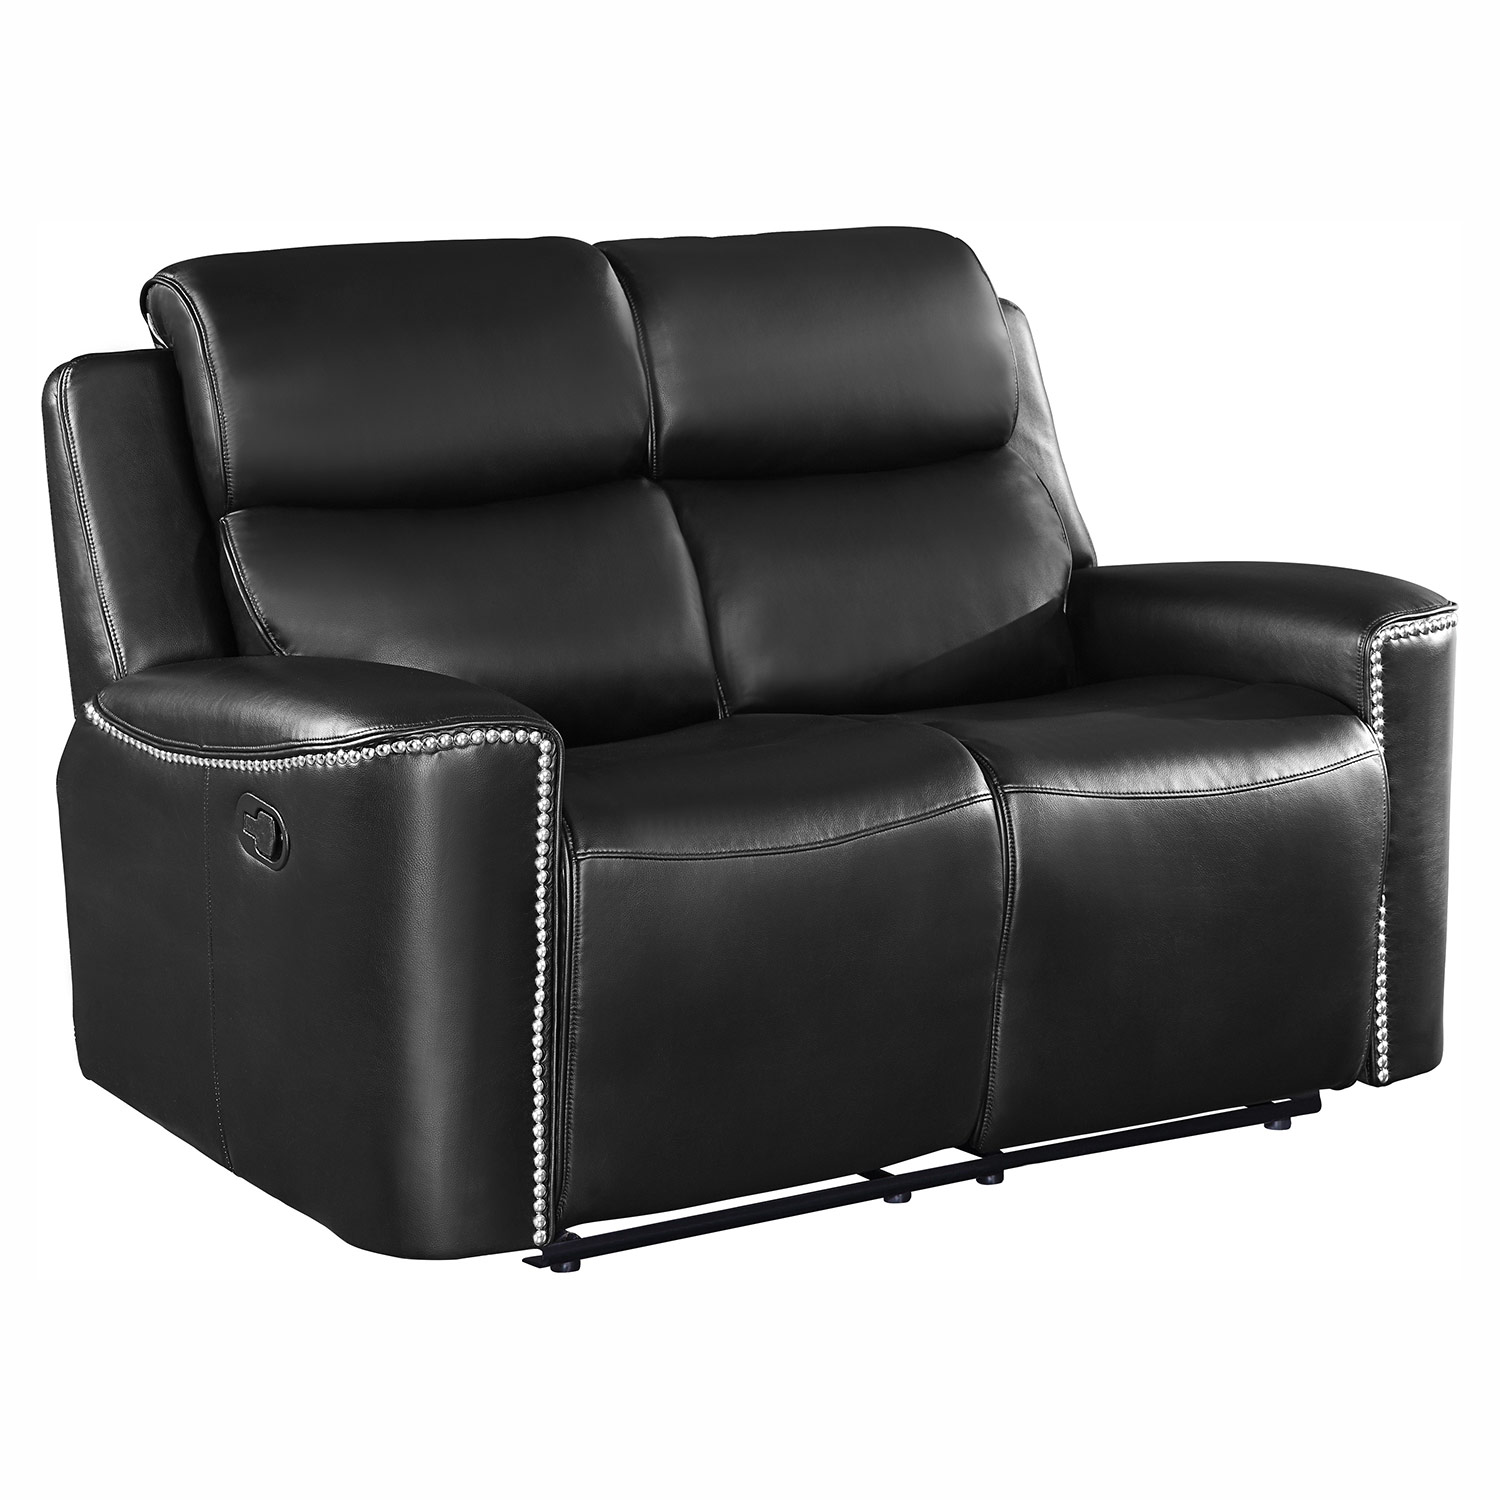 Homelegance Altair Double Reclining Love Seat - Black 9827BLK-2 at ...